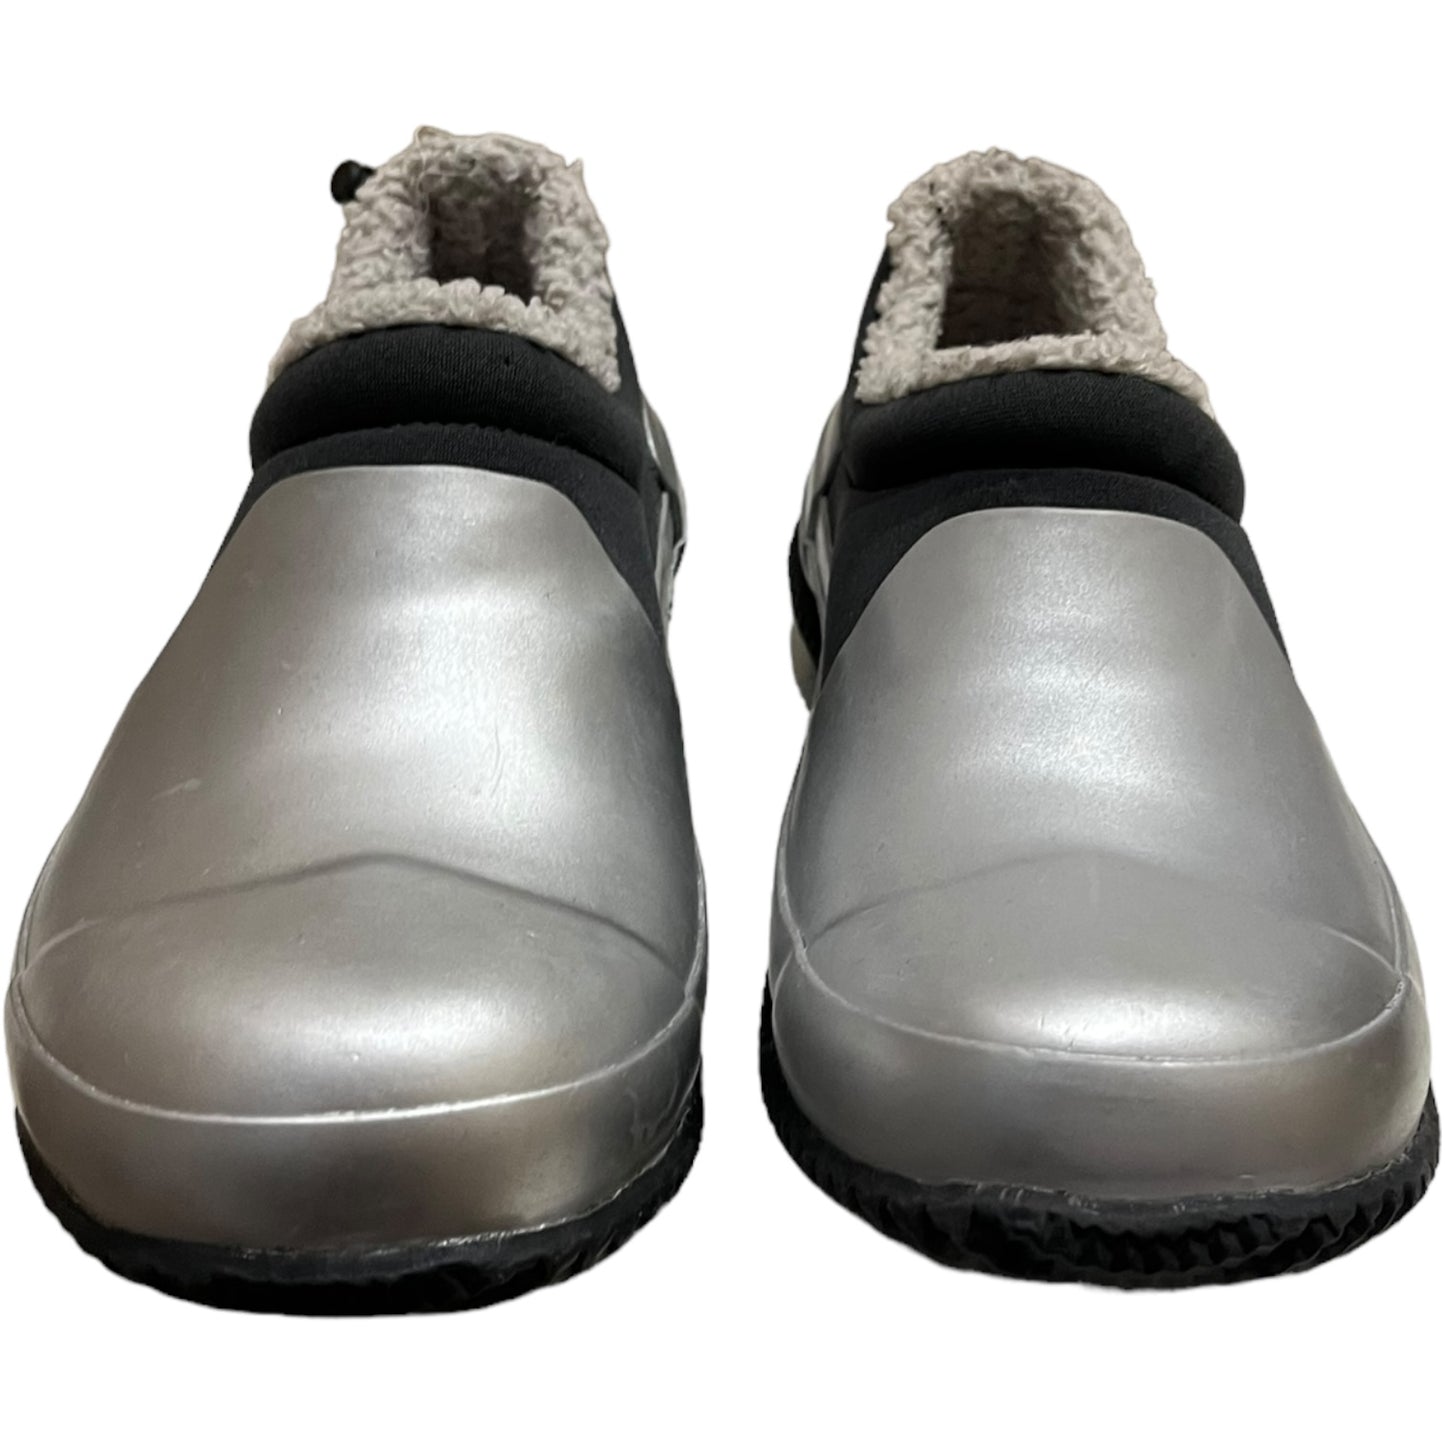 NEW Hunter Silver Wellie Boots